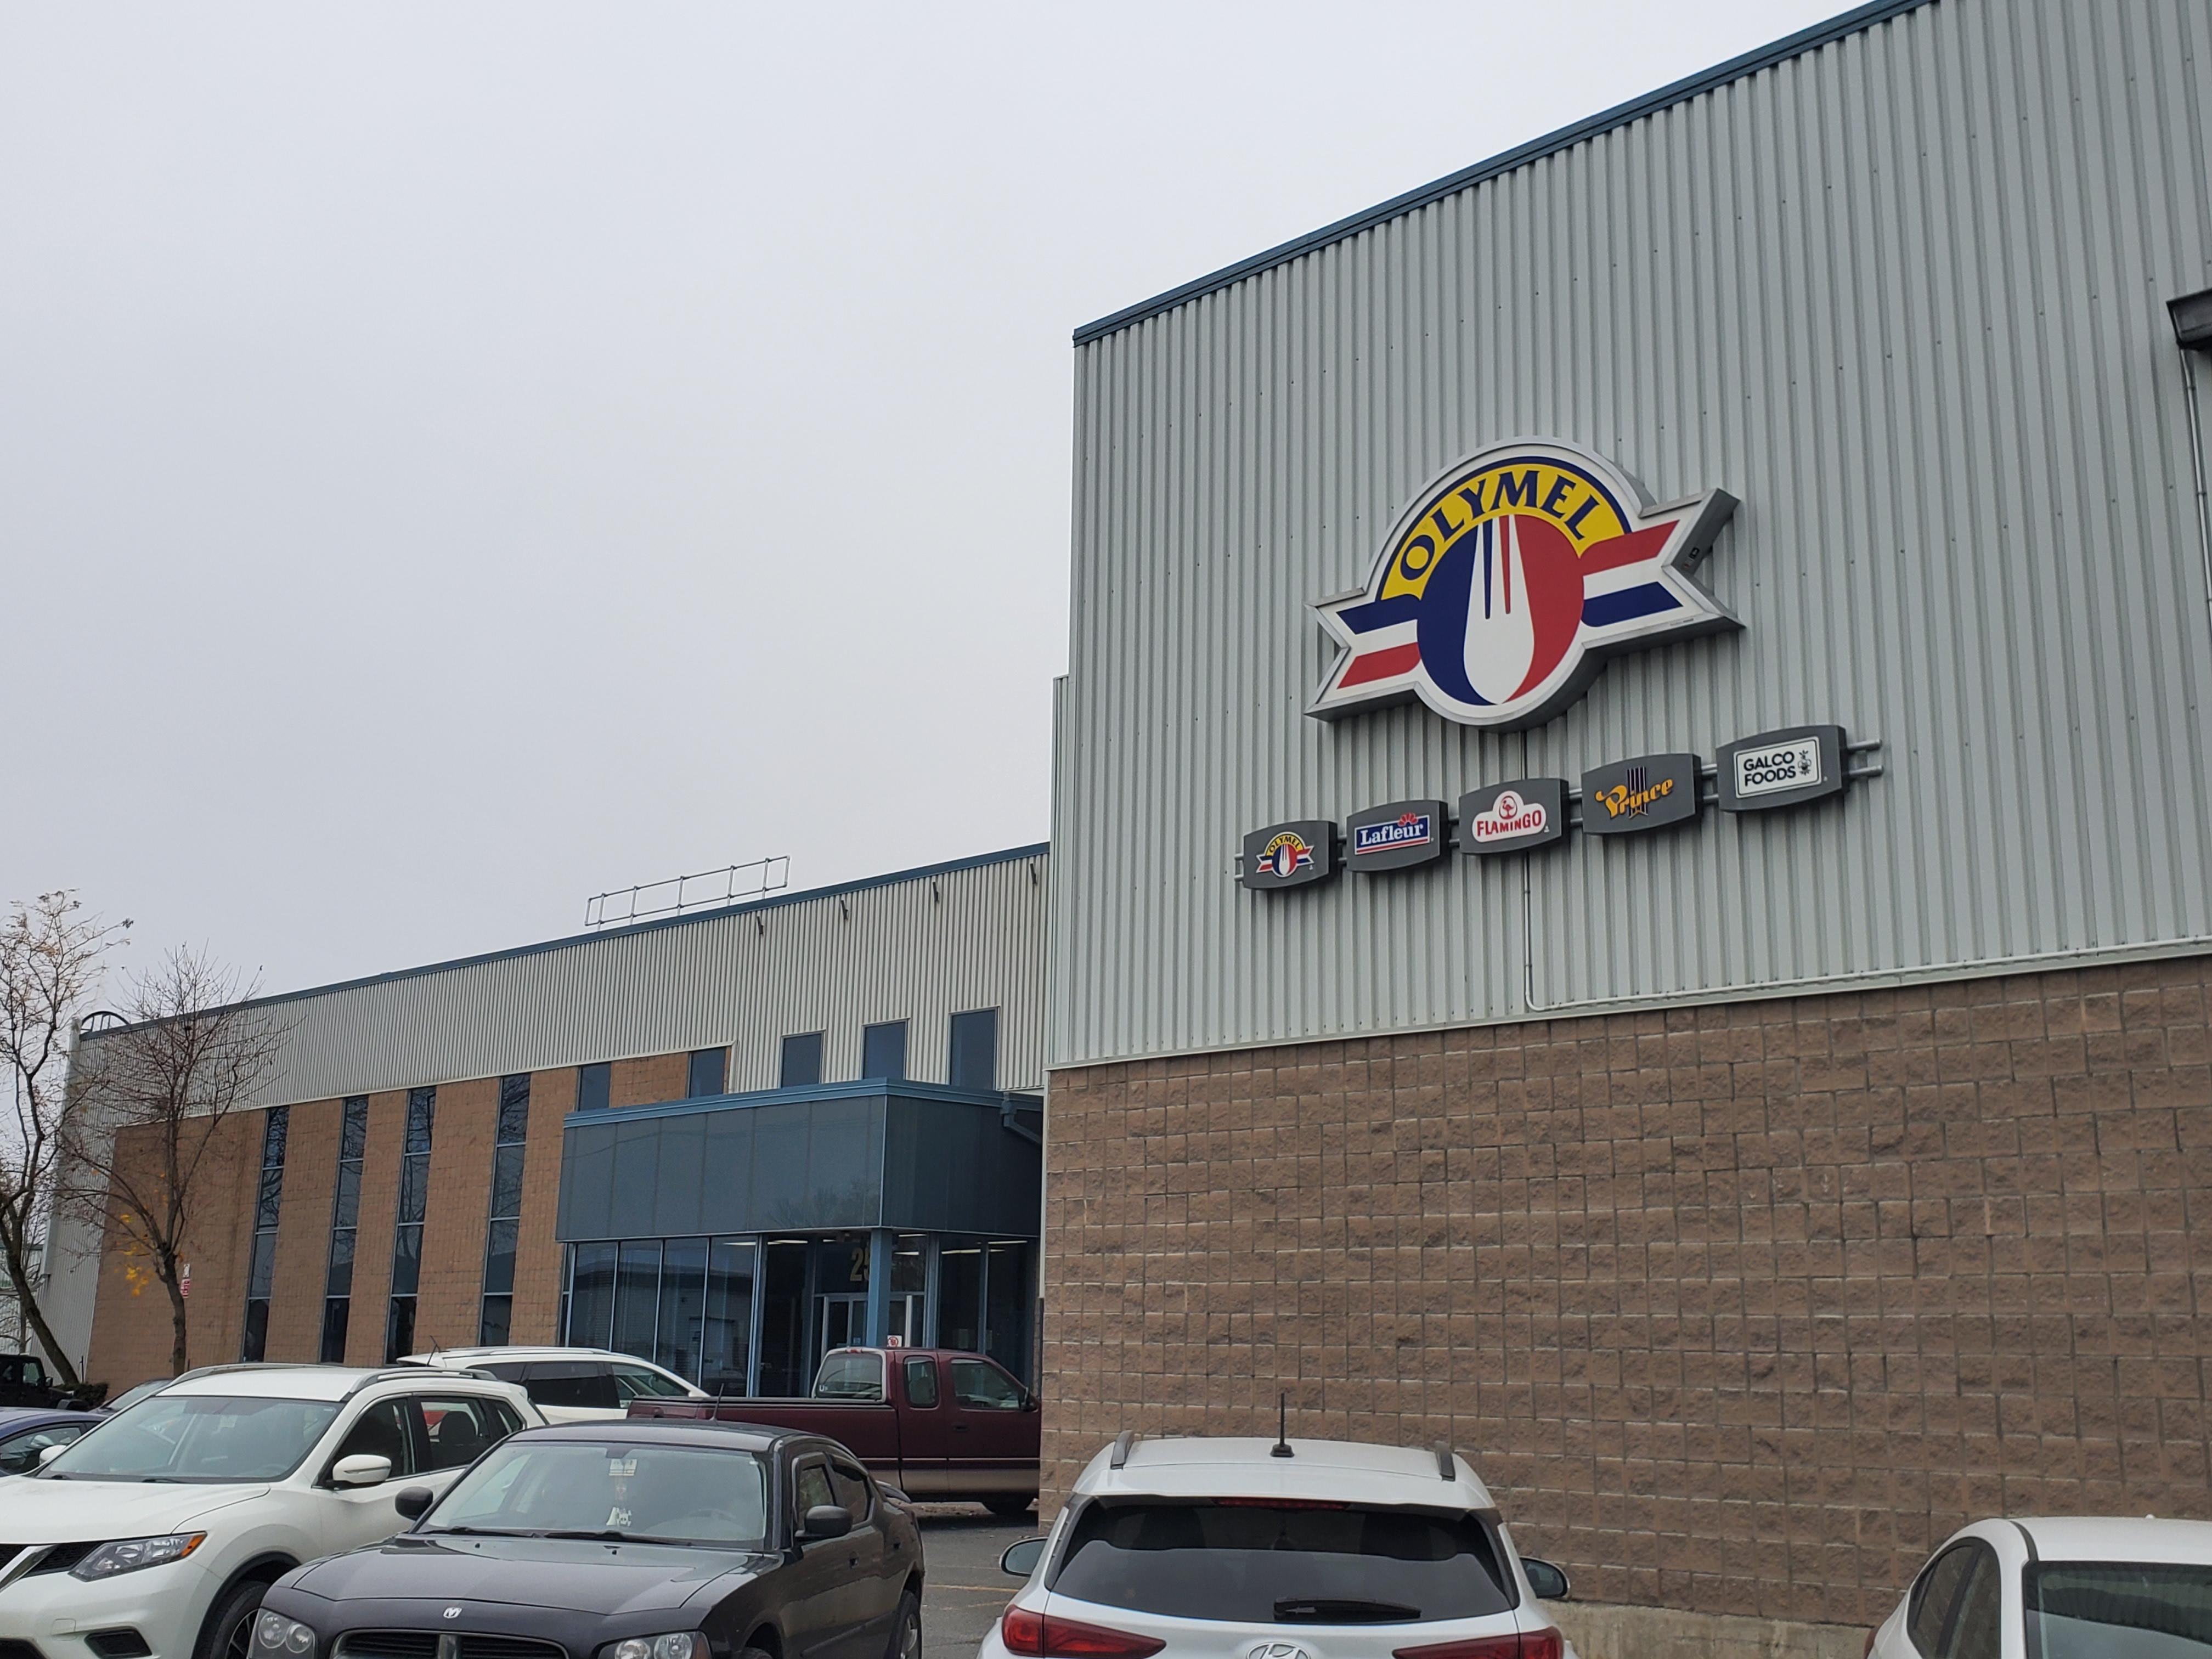 This Drummondville Plant Gives Priority To Collective Fall Protection